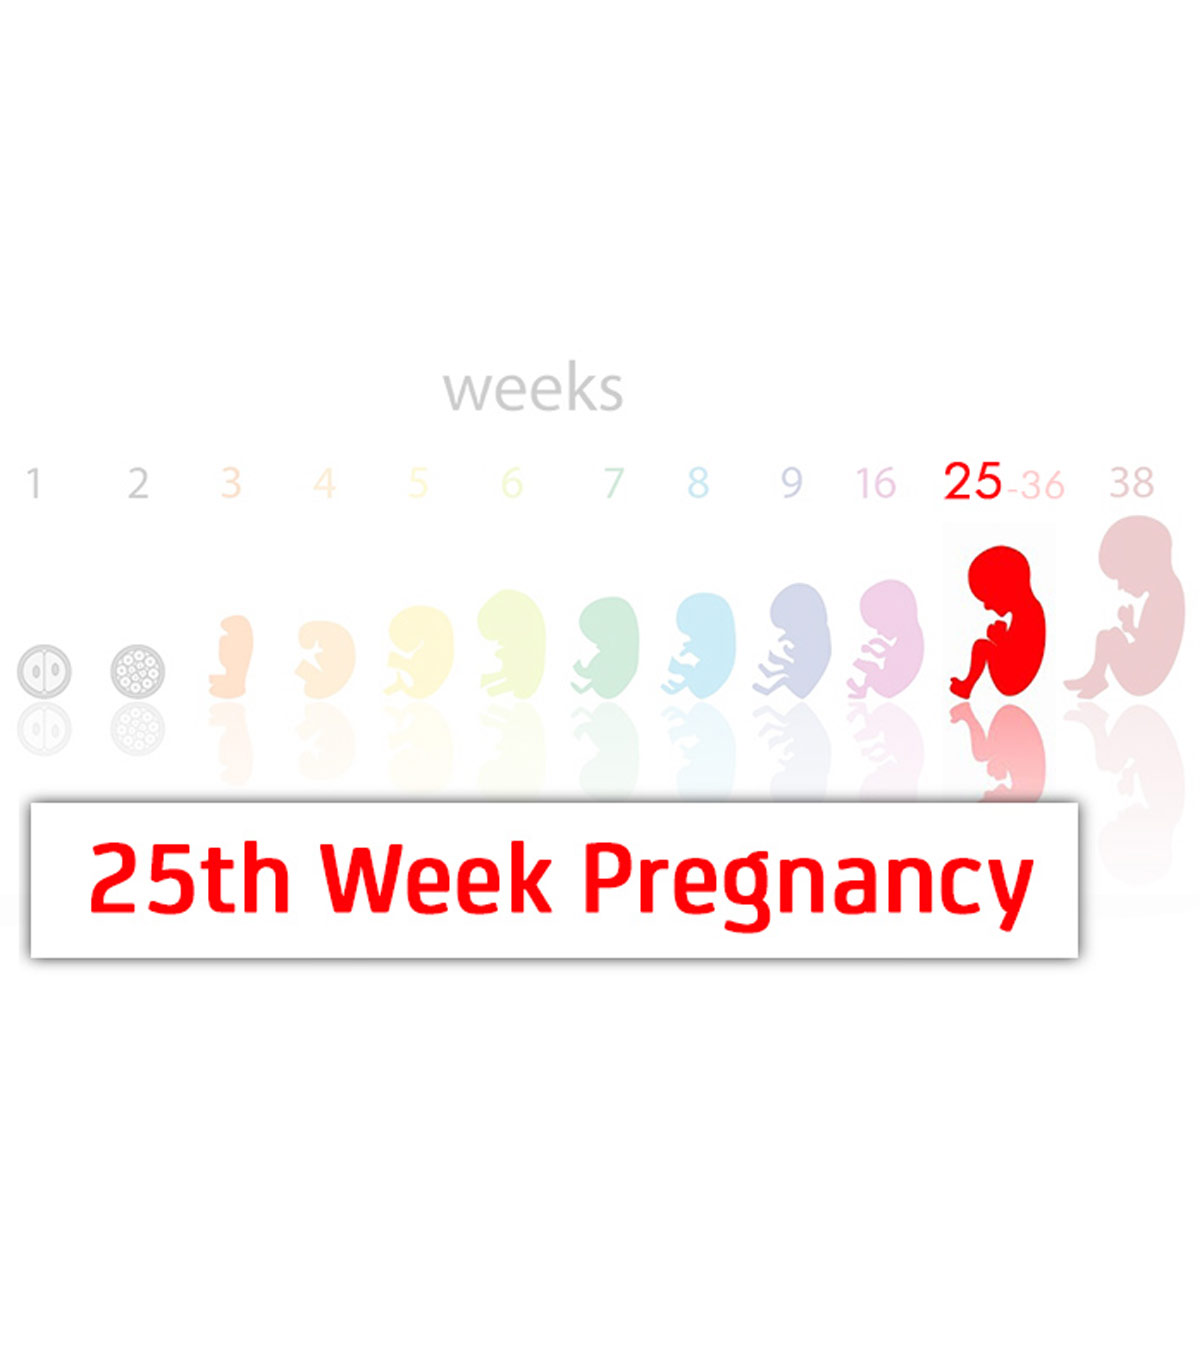 25th Week Pregnancy Symptoms, Baby Development And Body Changes